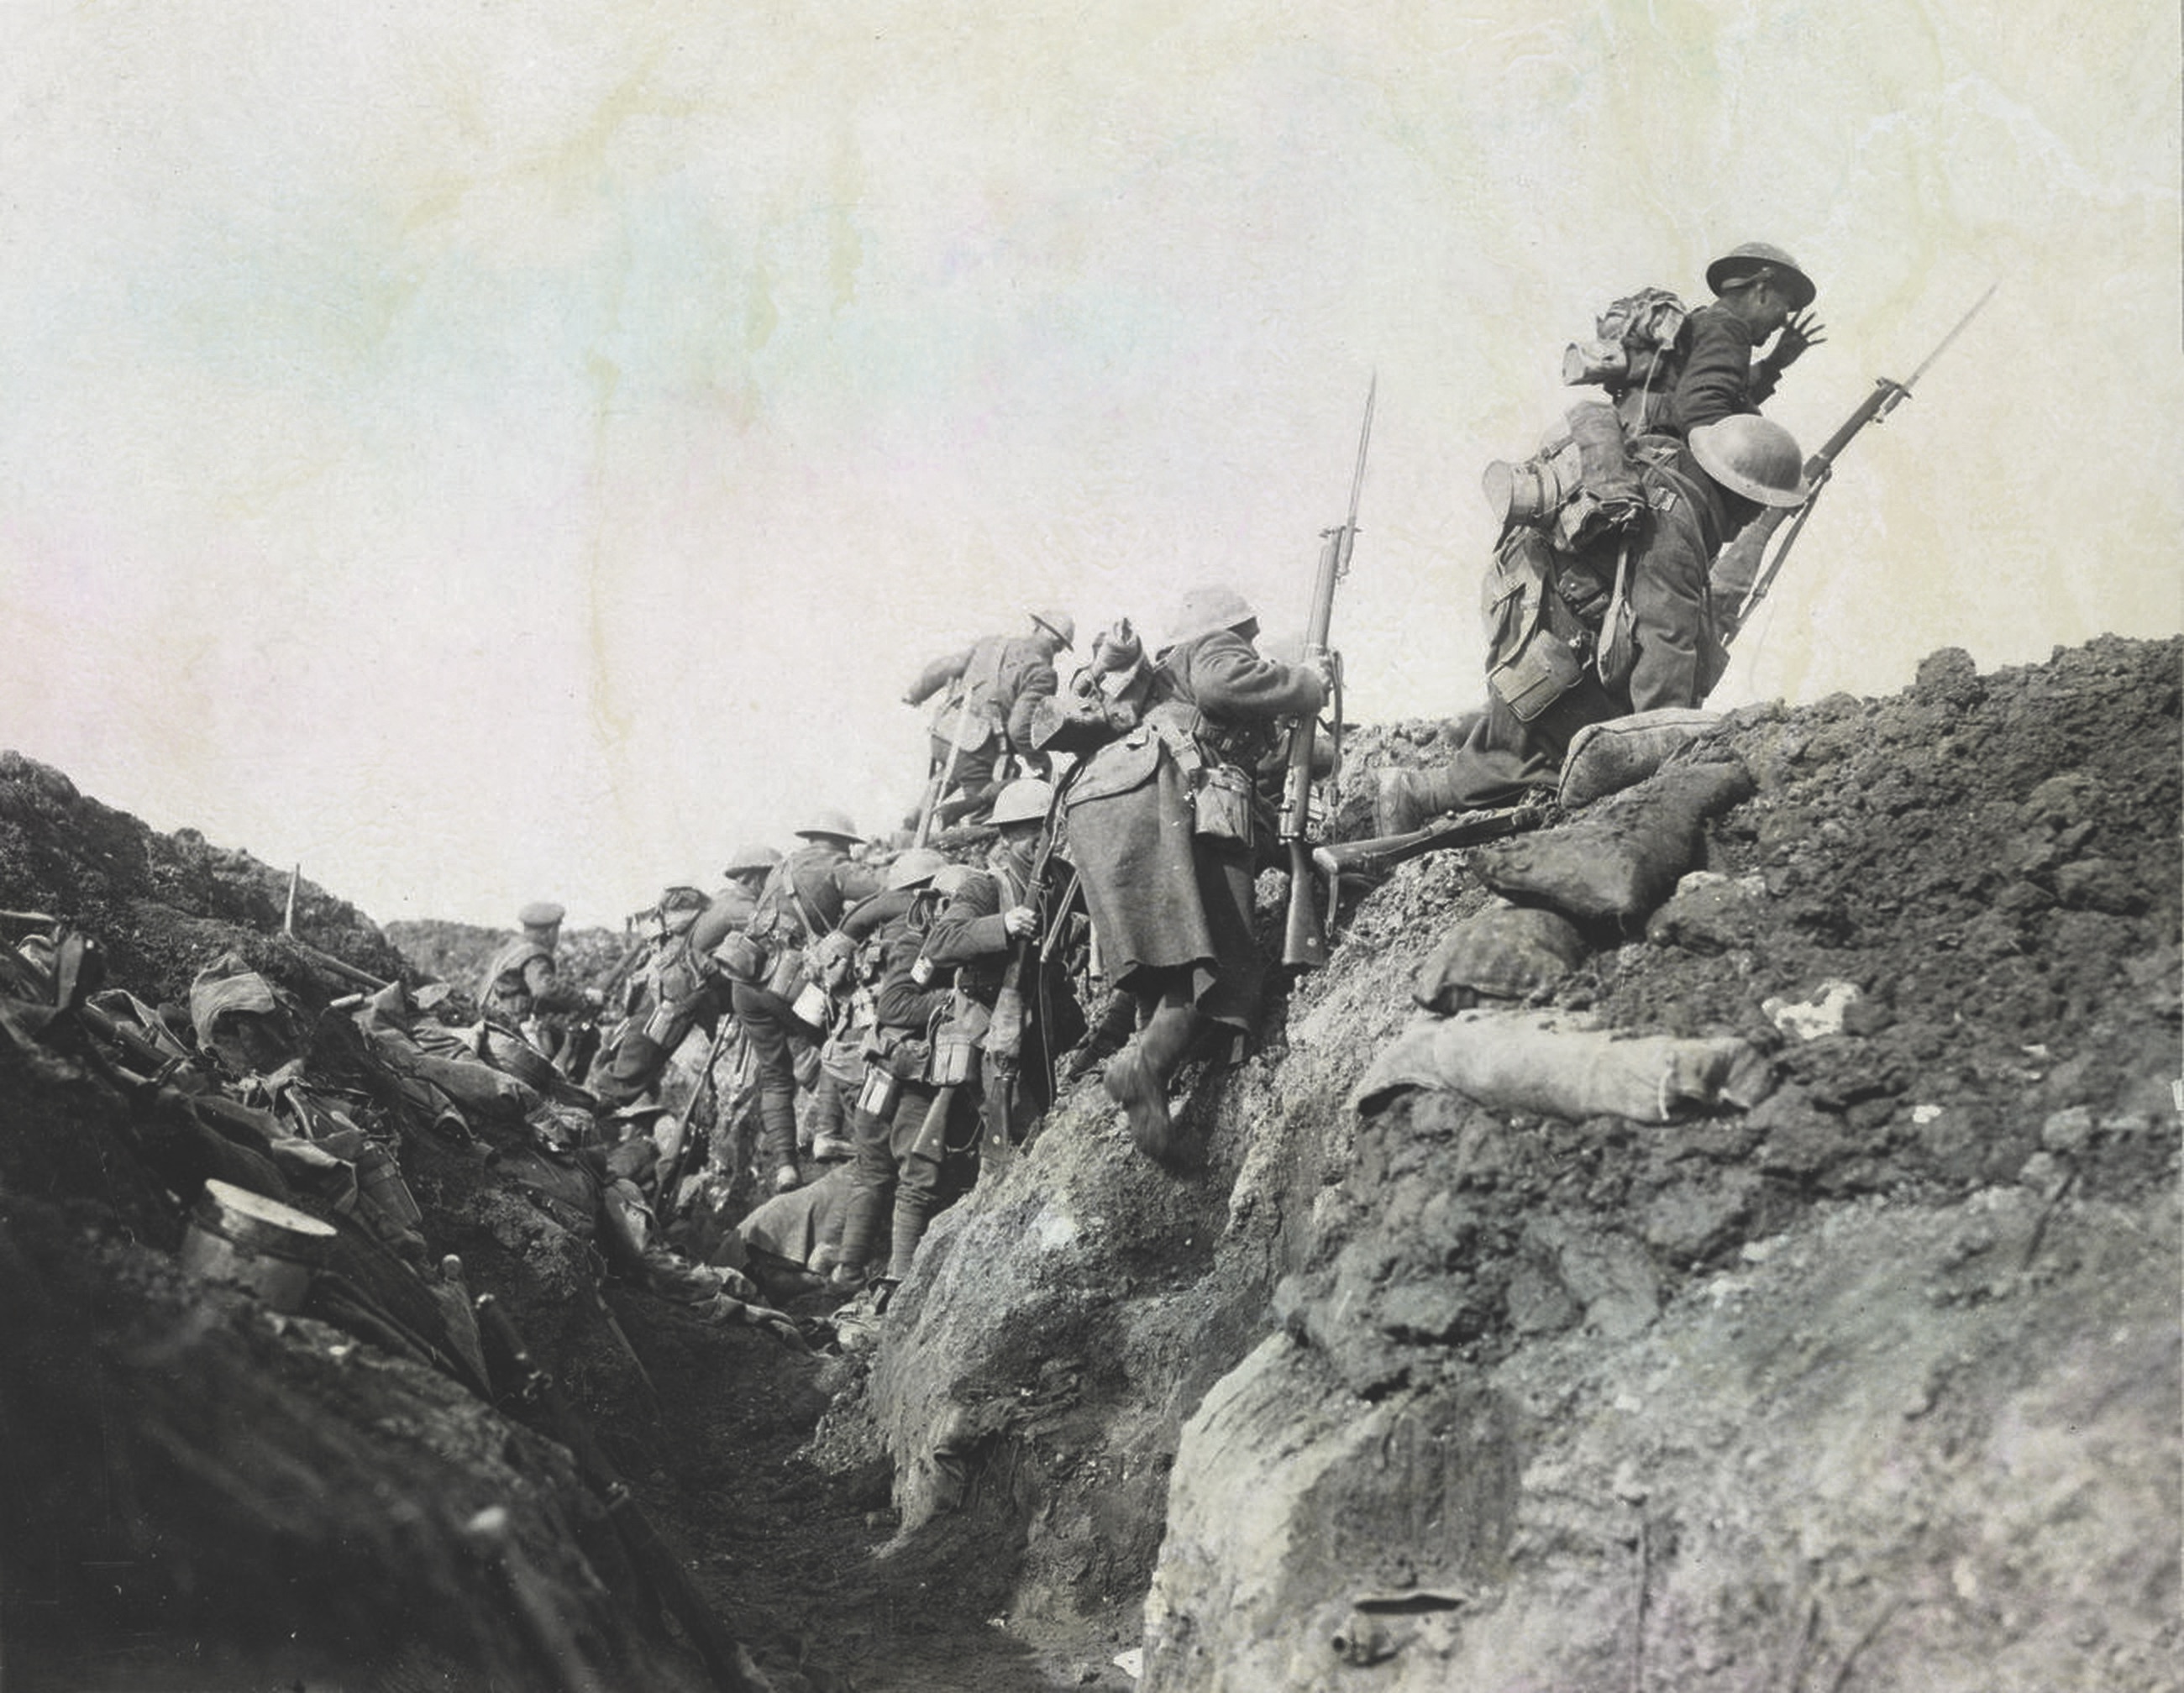 This photograph purported to show British troops going “over the top” in the Battle of the Somme, where Empey was wounded, but it was actually taken during a behind-the-lines training exercise. (Imperial War Museums)